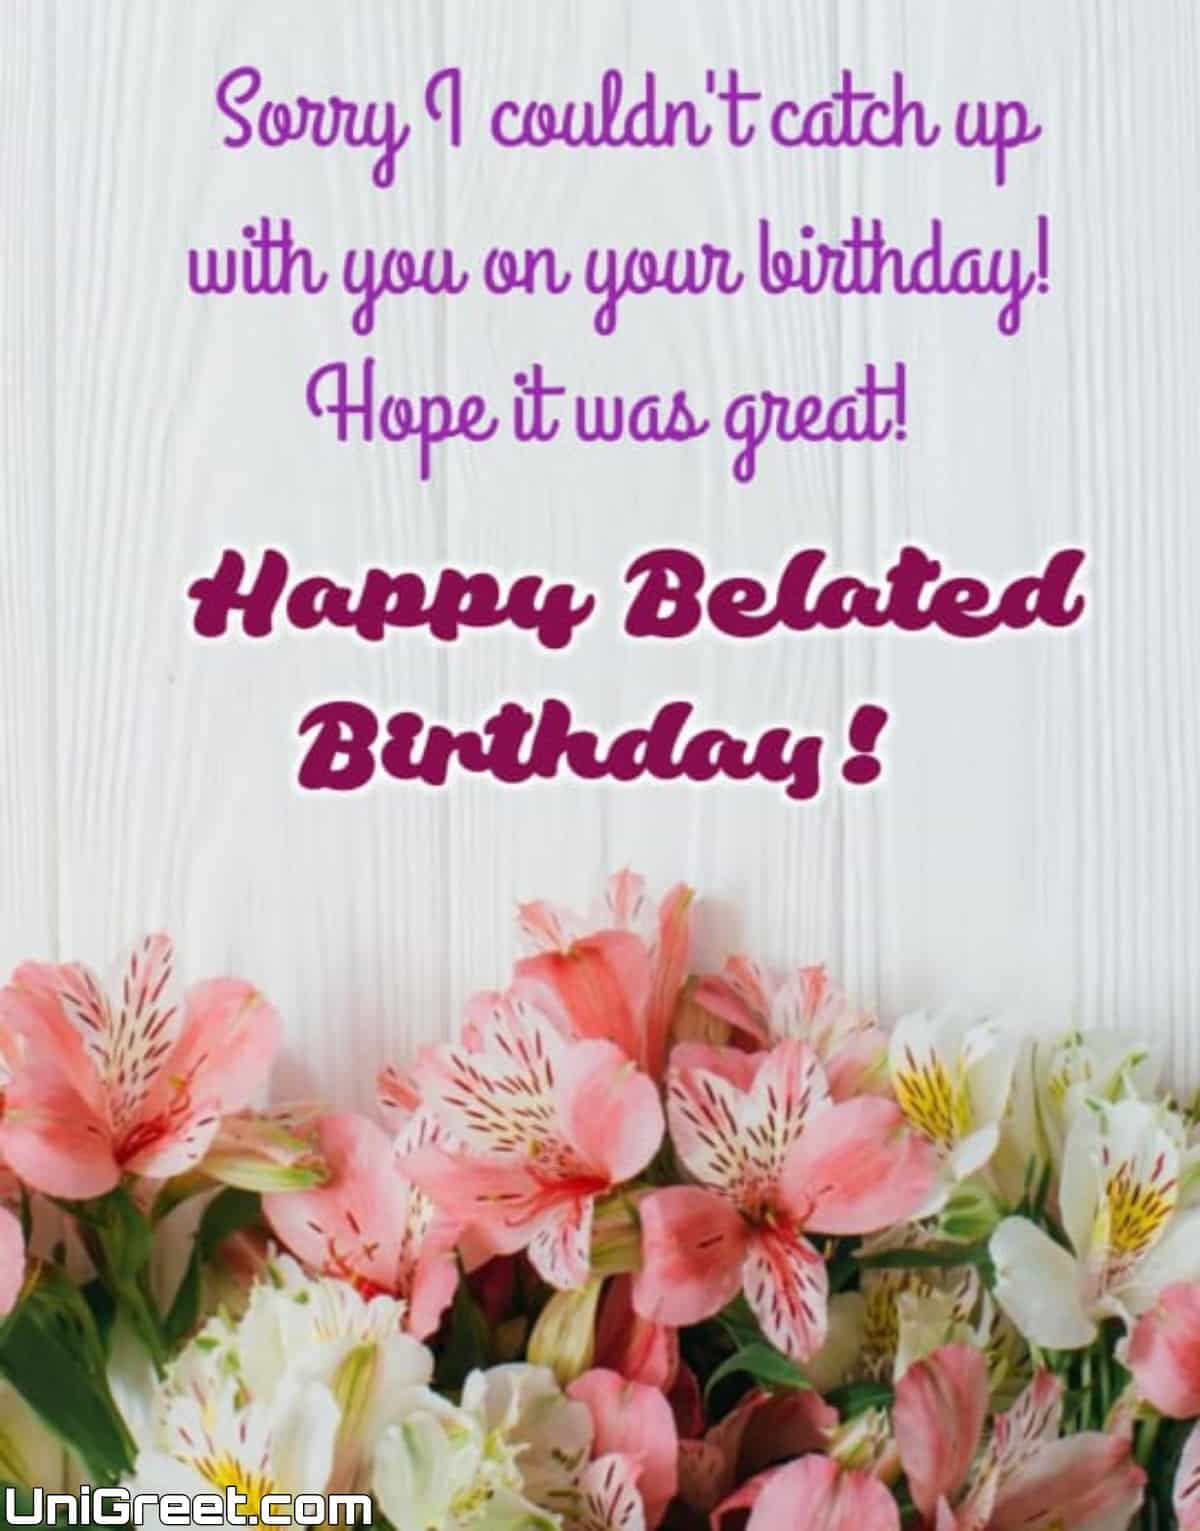 50 Best Belated Happy Birthday Wishes Images Free Download